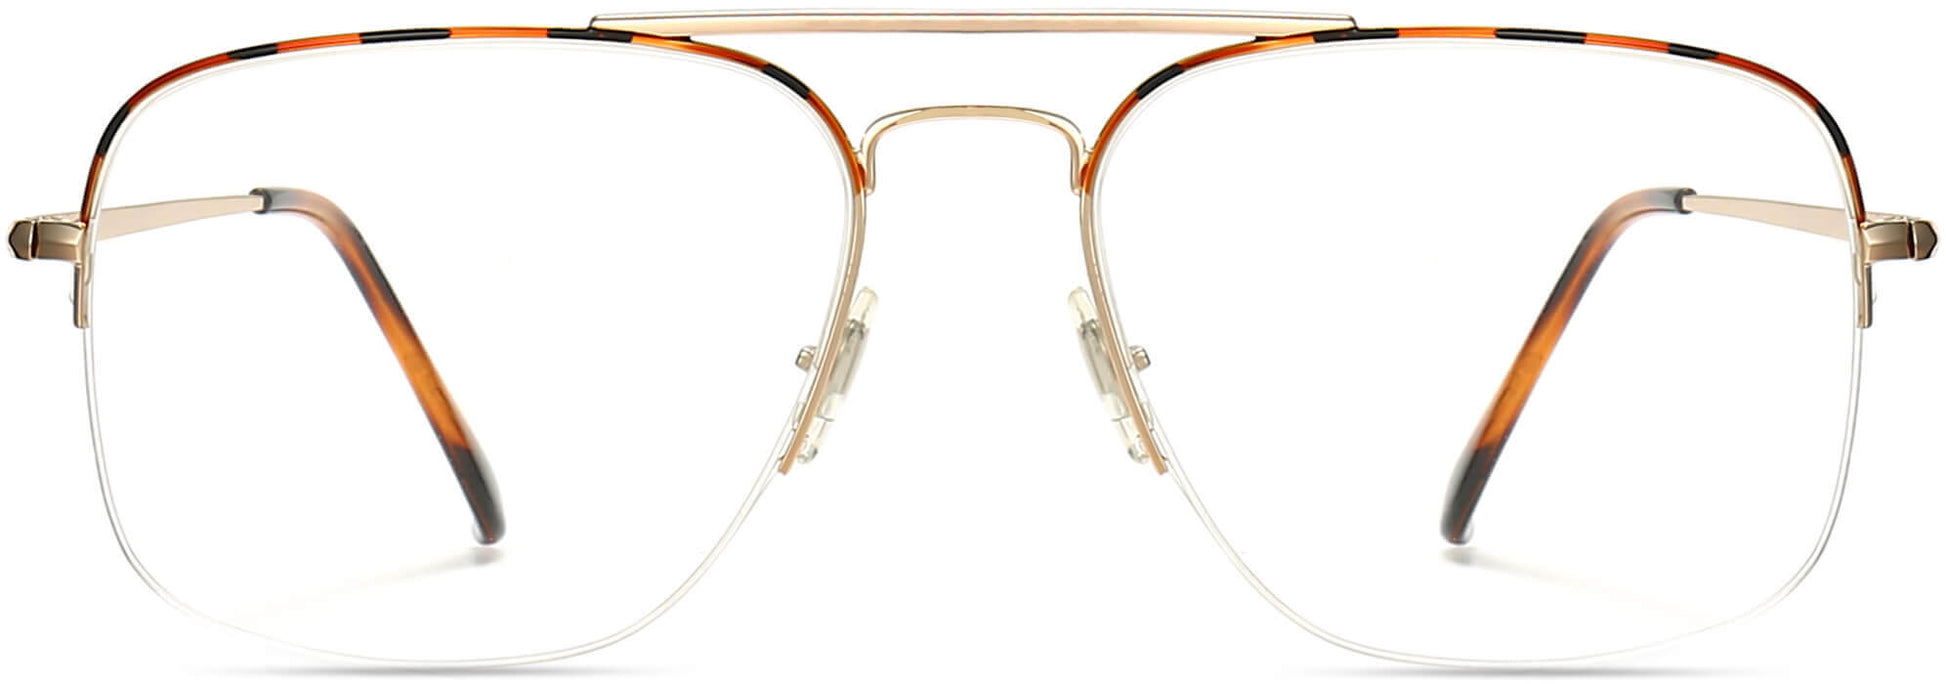 Zayden Square Tortoise Eyeglasses from ANRRI, front view